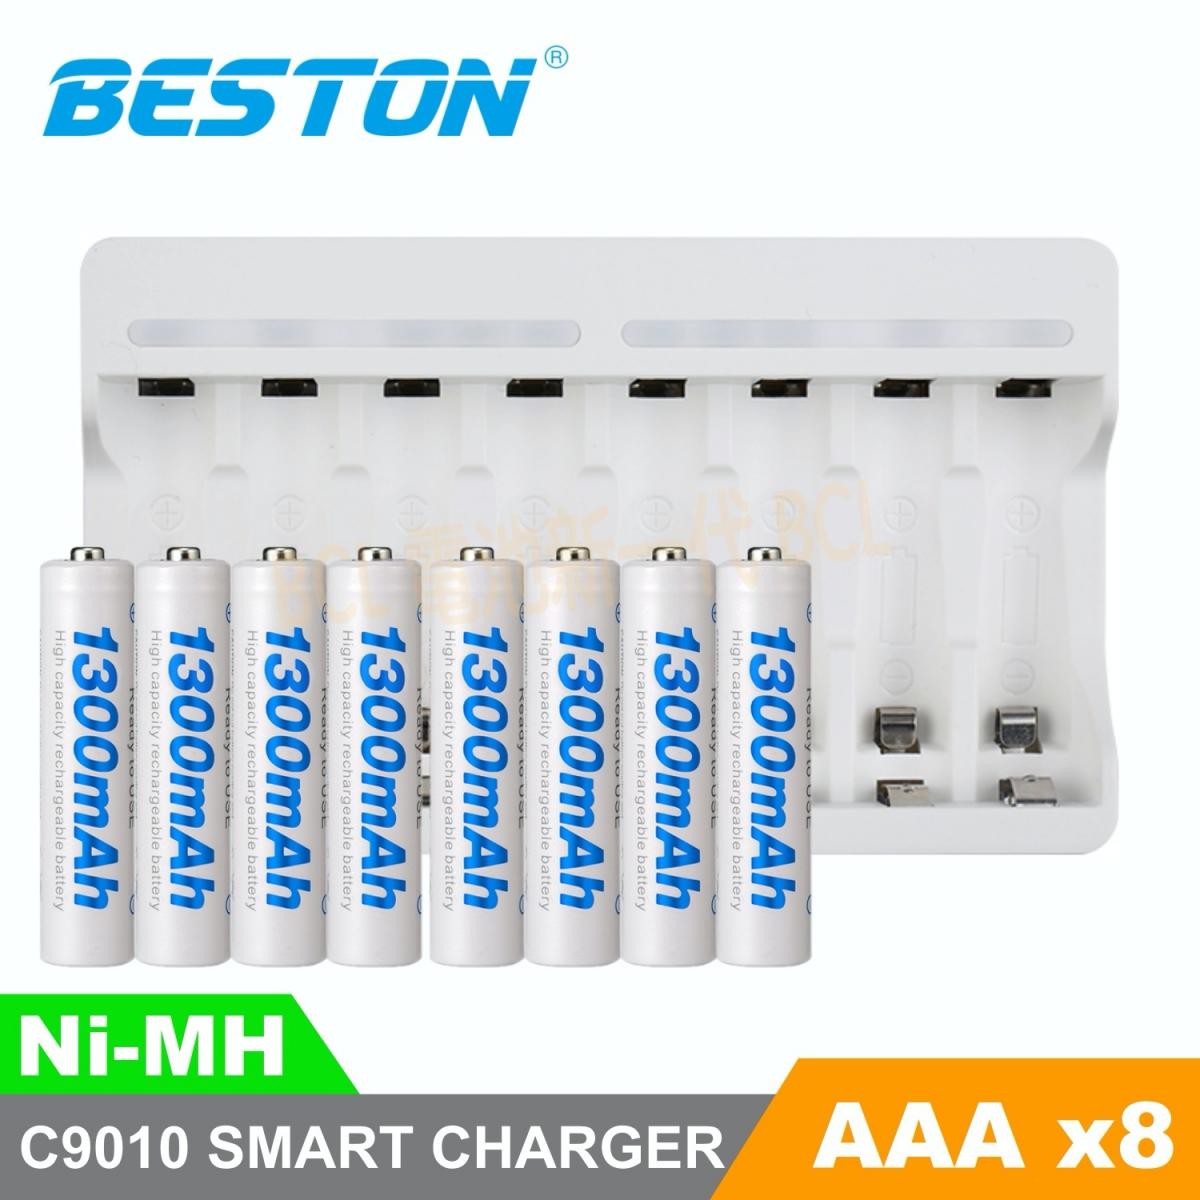 1.2V AAA (8pcs) Ni-MH Rechargeable Batteries with C9010 8-Slot Smart Charger